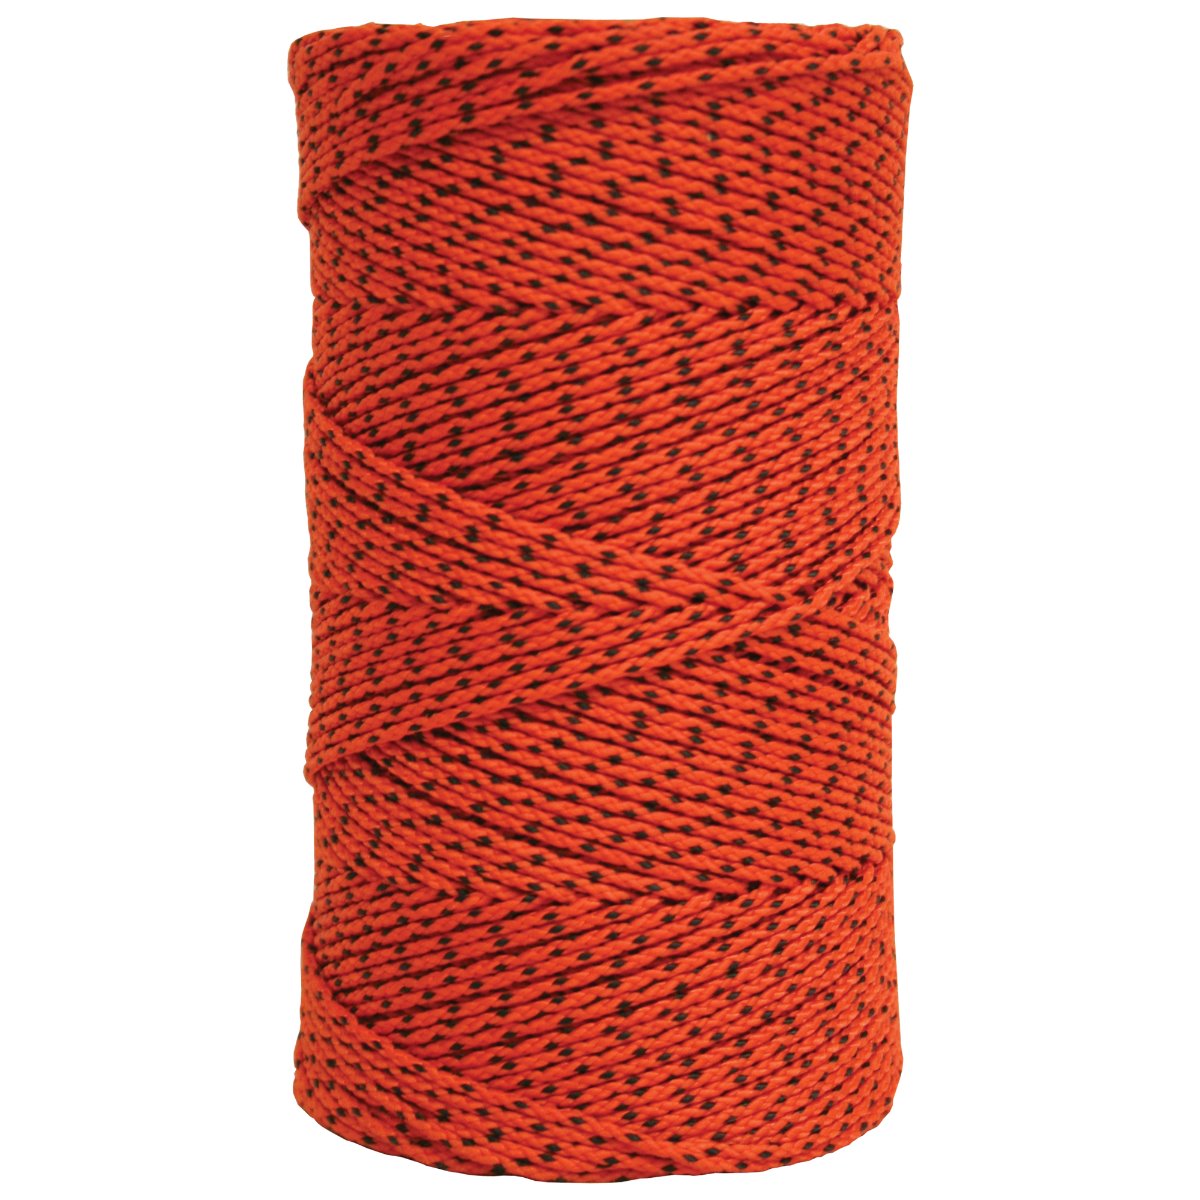 W.rose make a braided brick twine which is used by bricklayers. Available by Speedcrete. United Kingdom. 